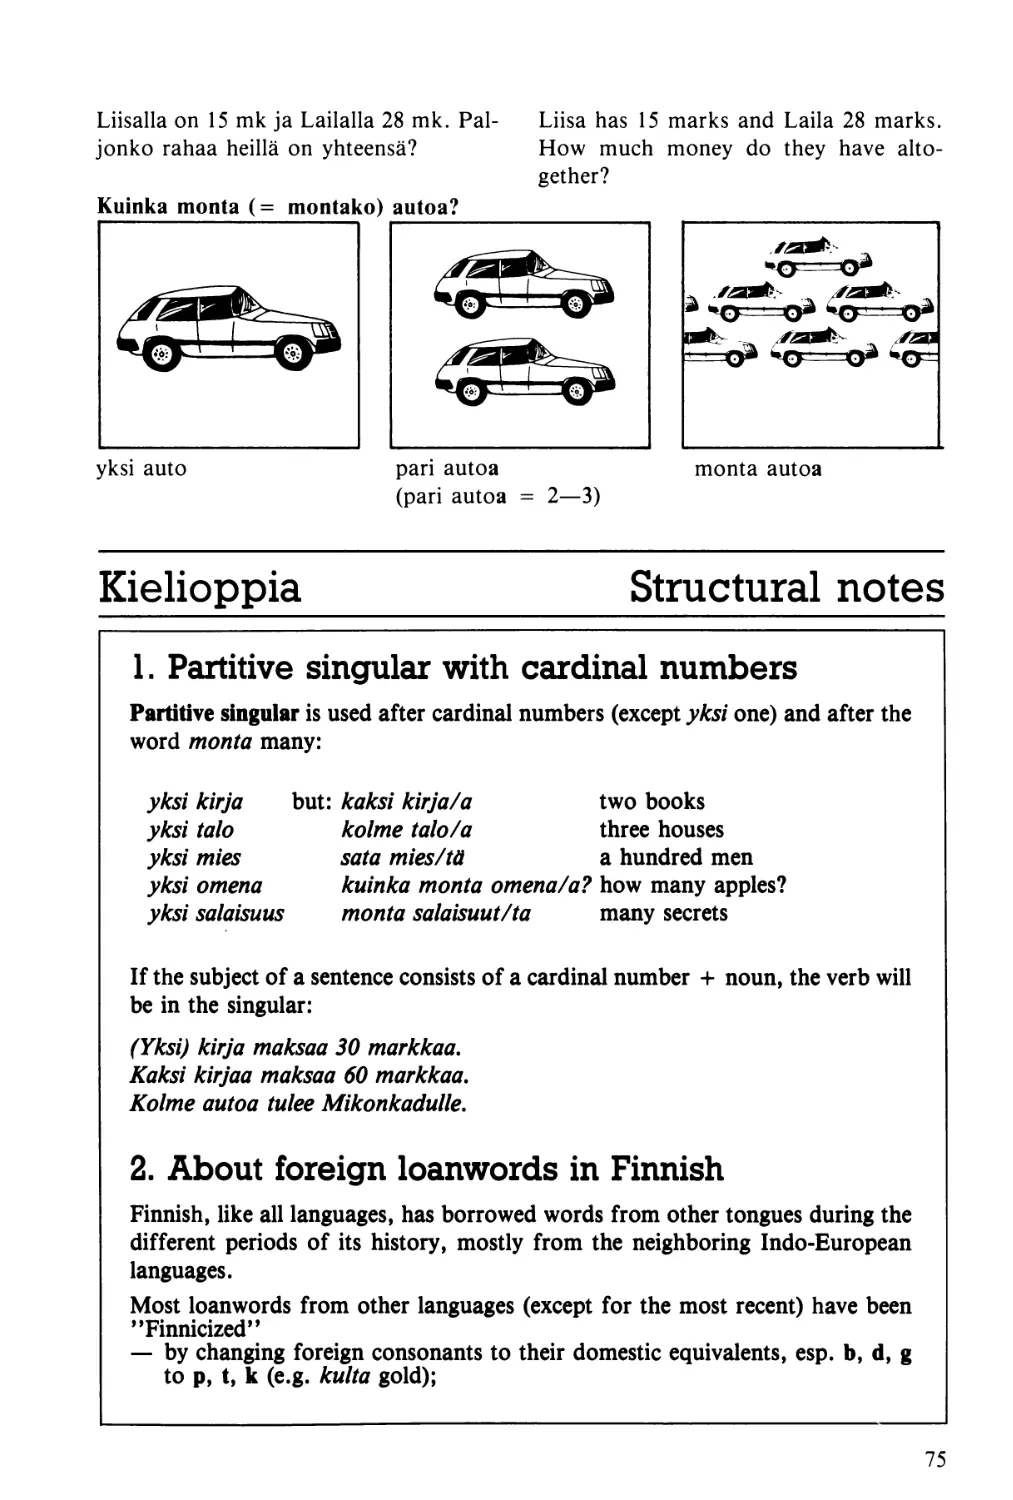 About foreign loanwords in Finnish